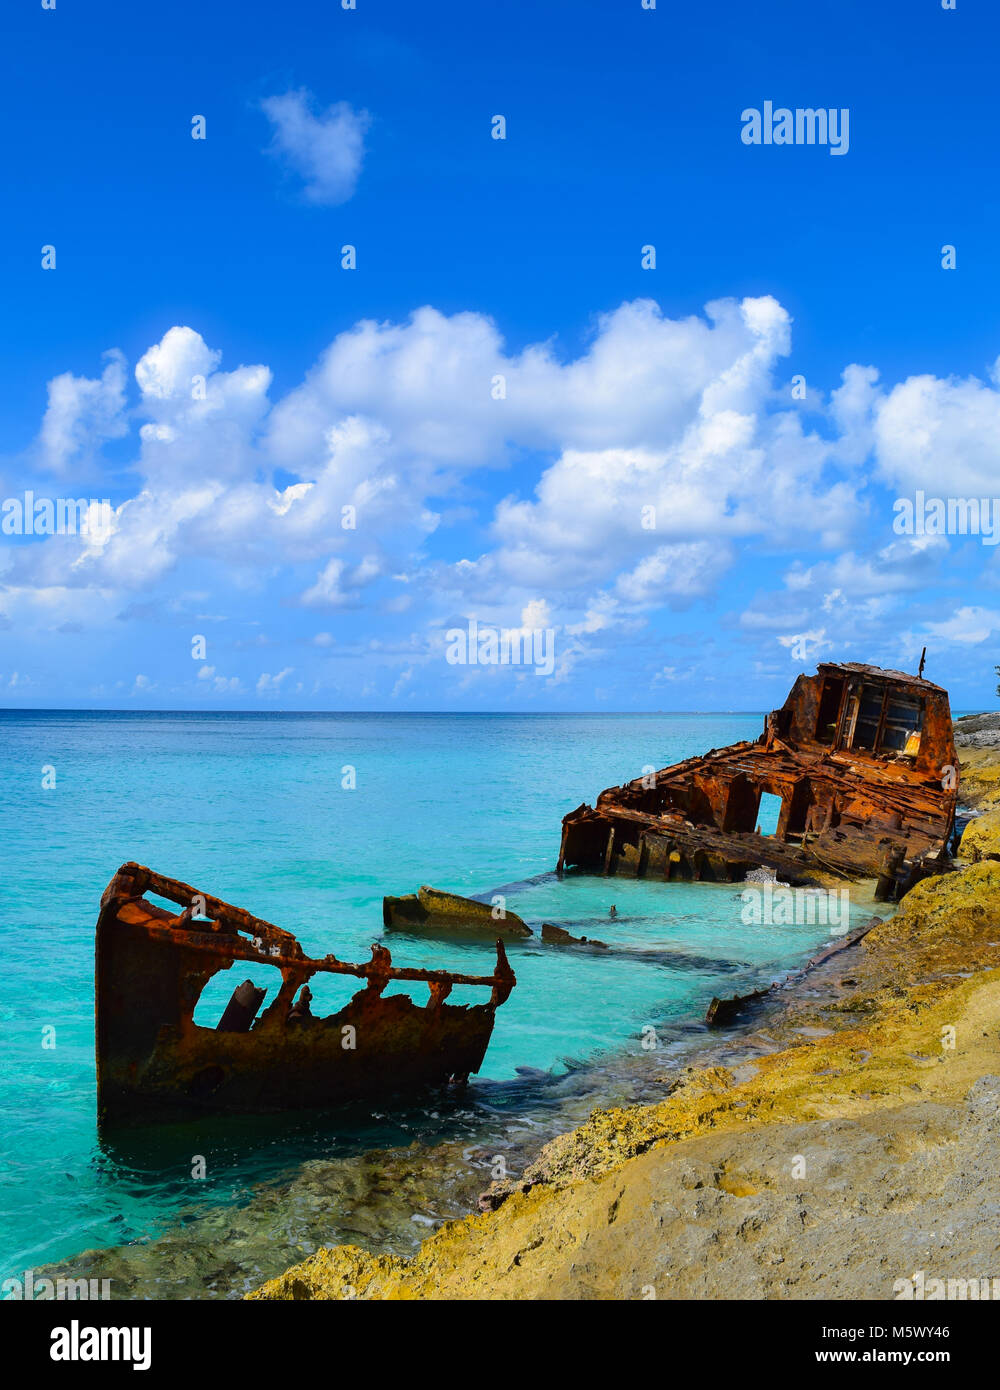 A shipwreck lies rusting in the crystal clear waters of the beautiful Caribbean island of North Bimini, Bahamas Stock Photo